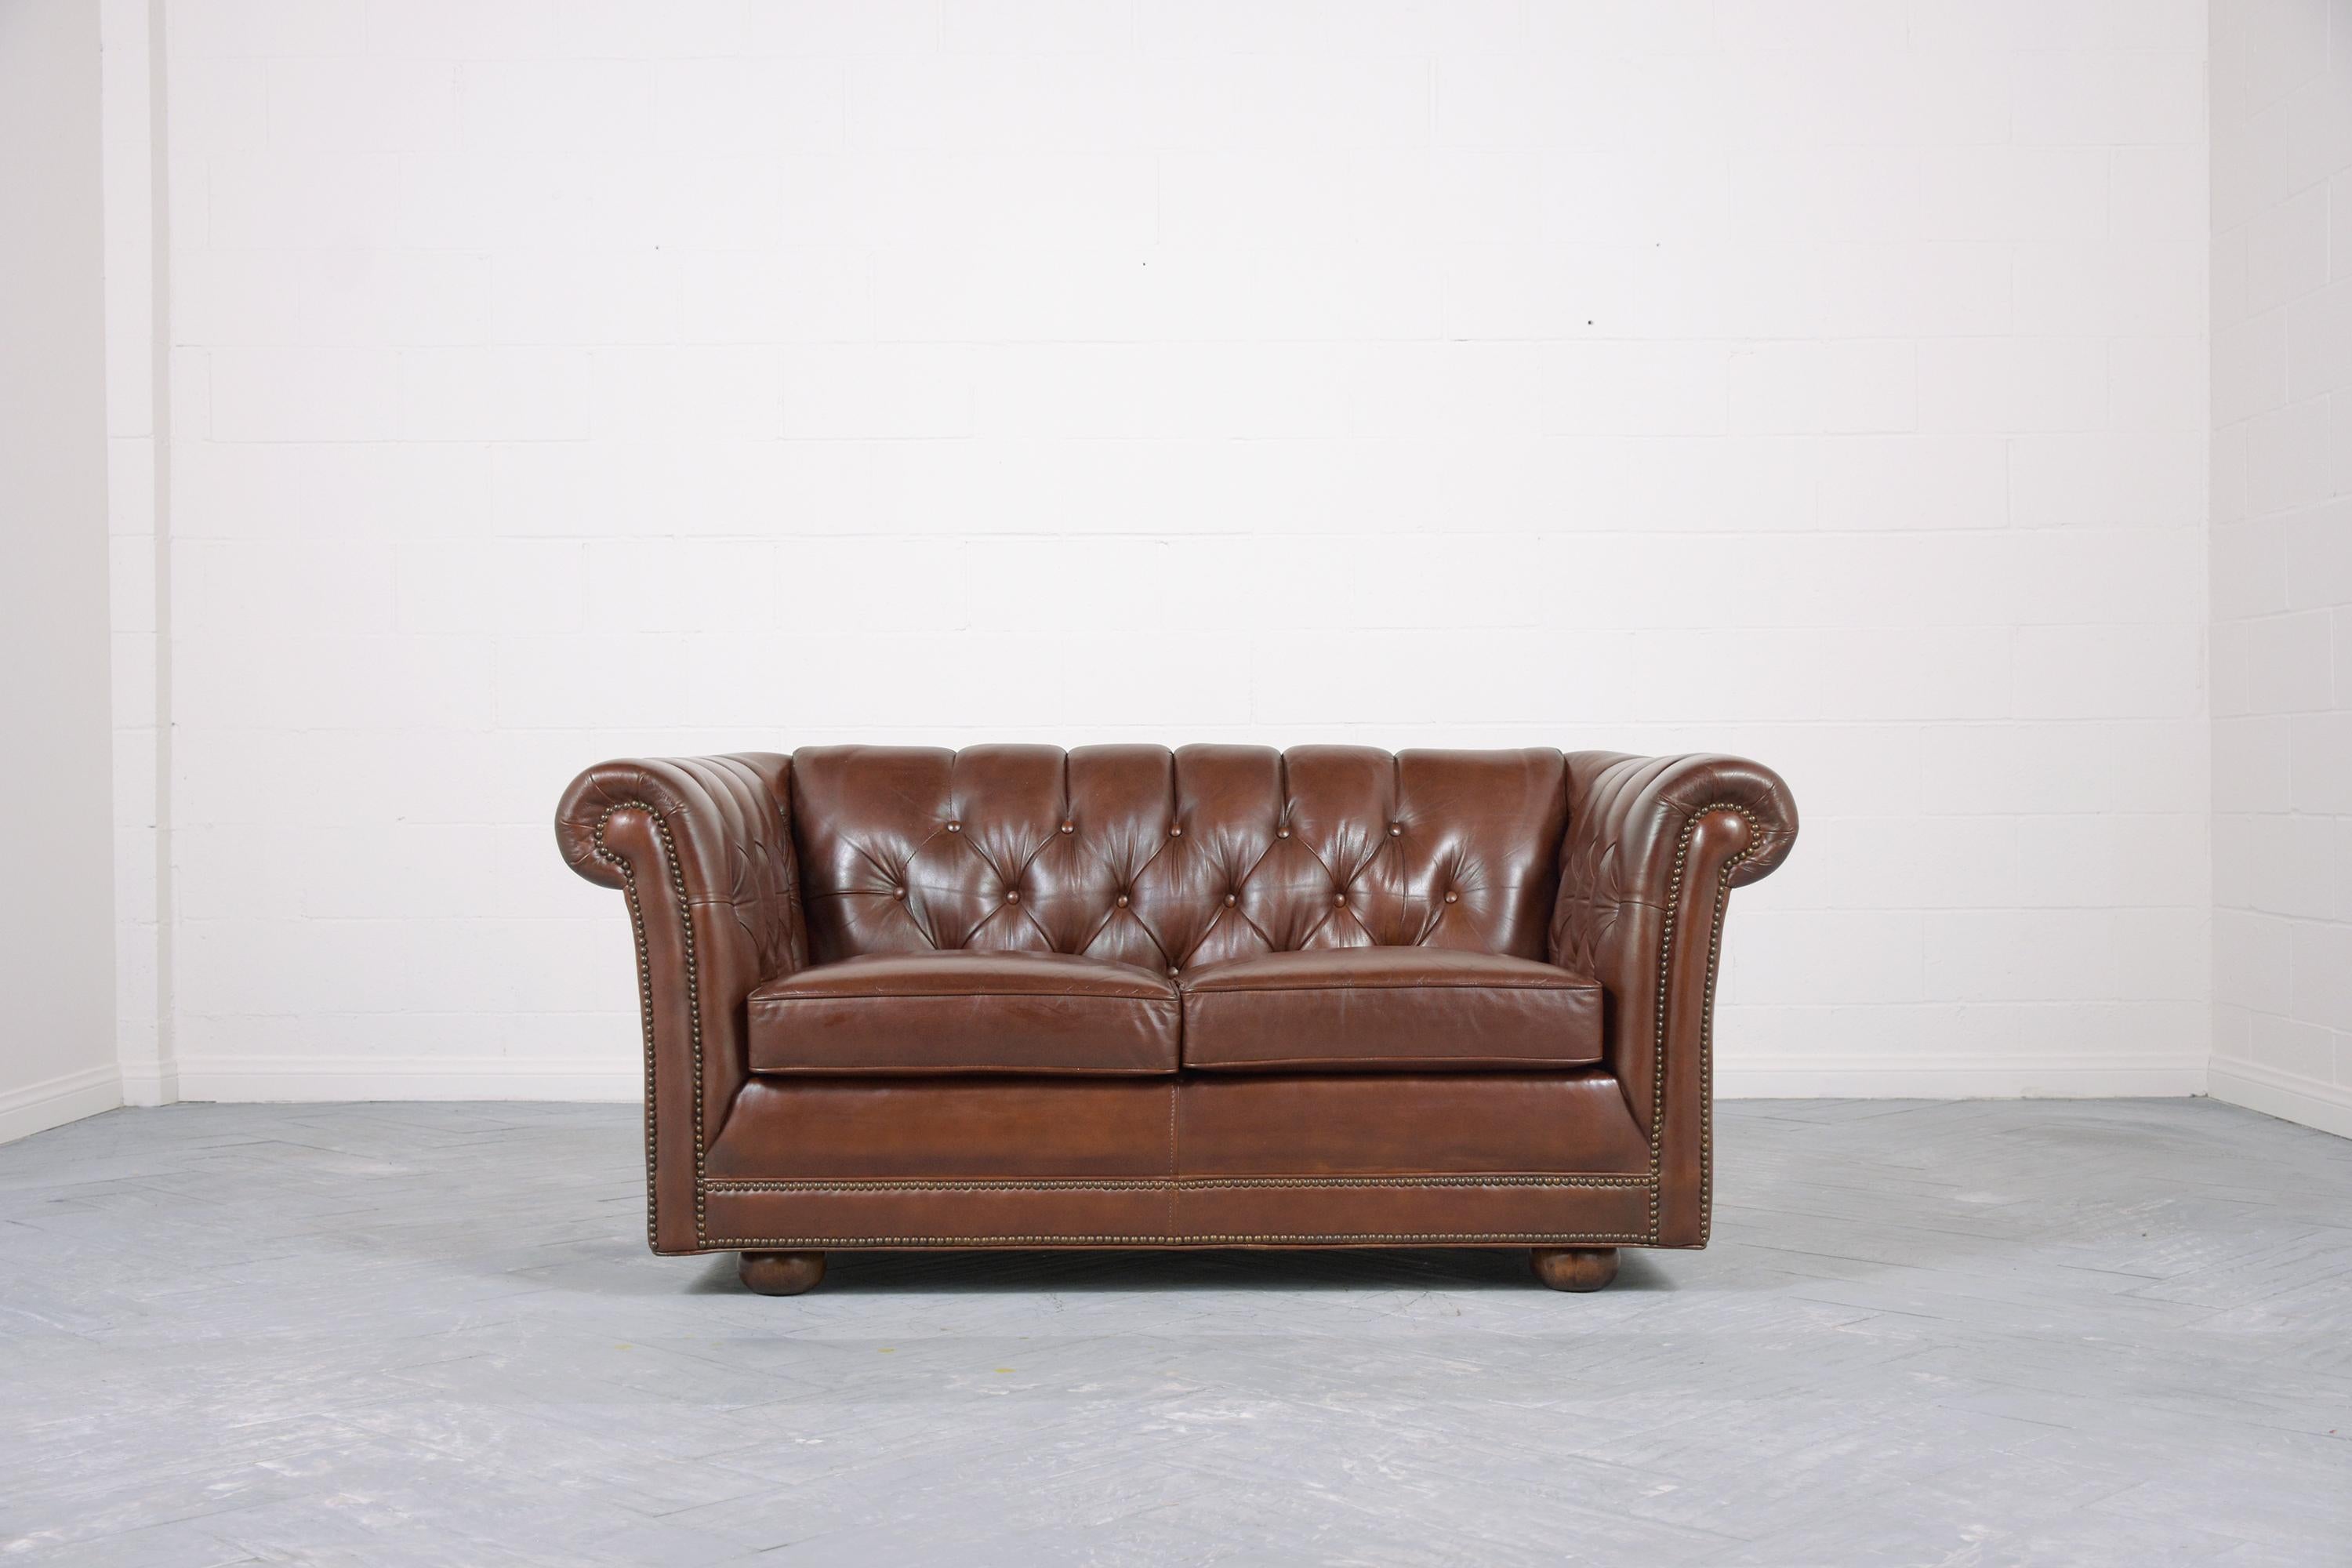 Carved Vintage Brown Leather Chesterfield Sofa